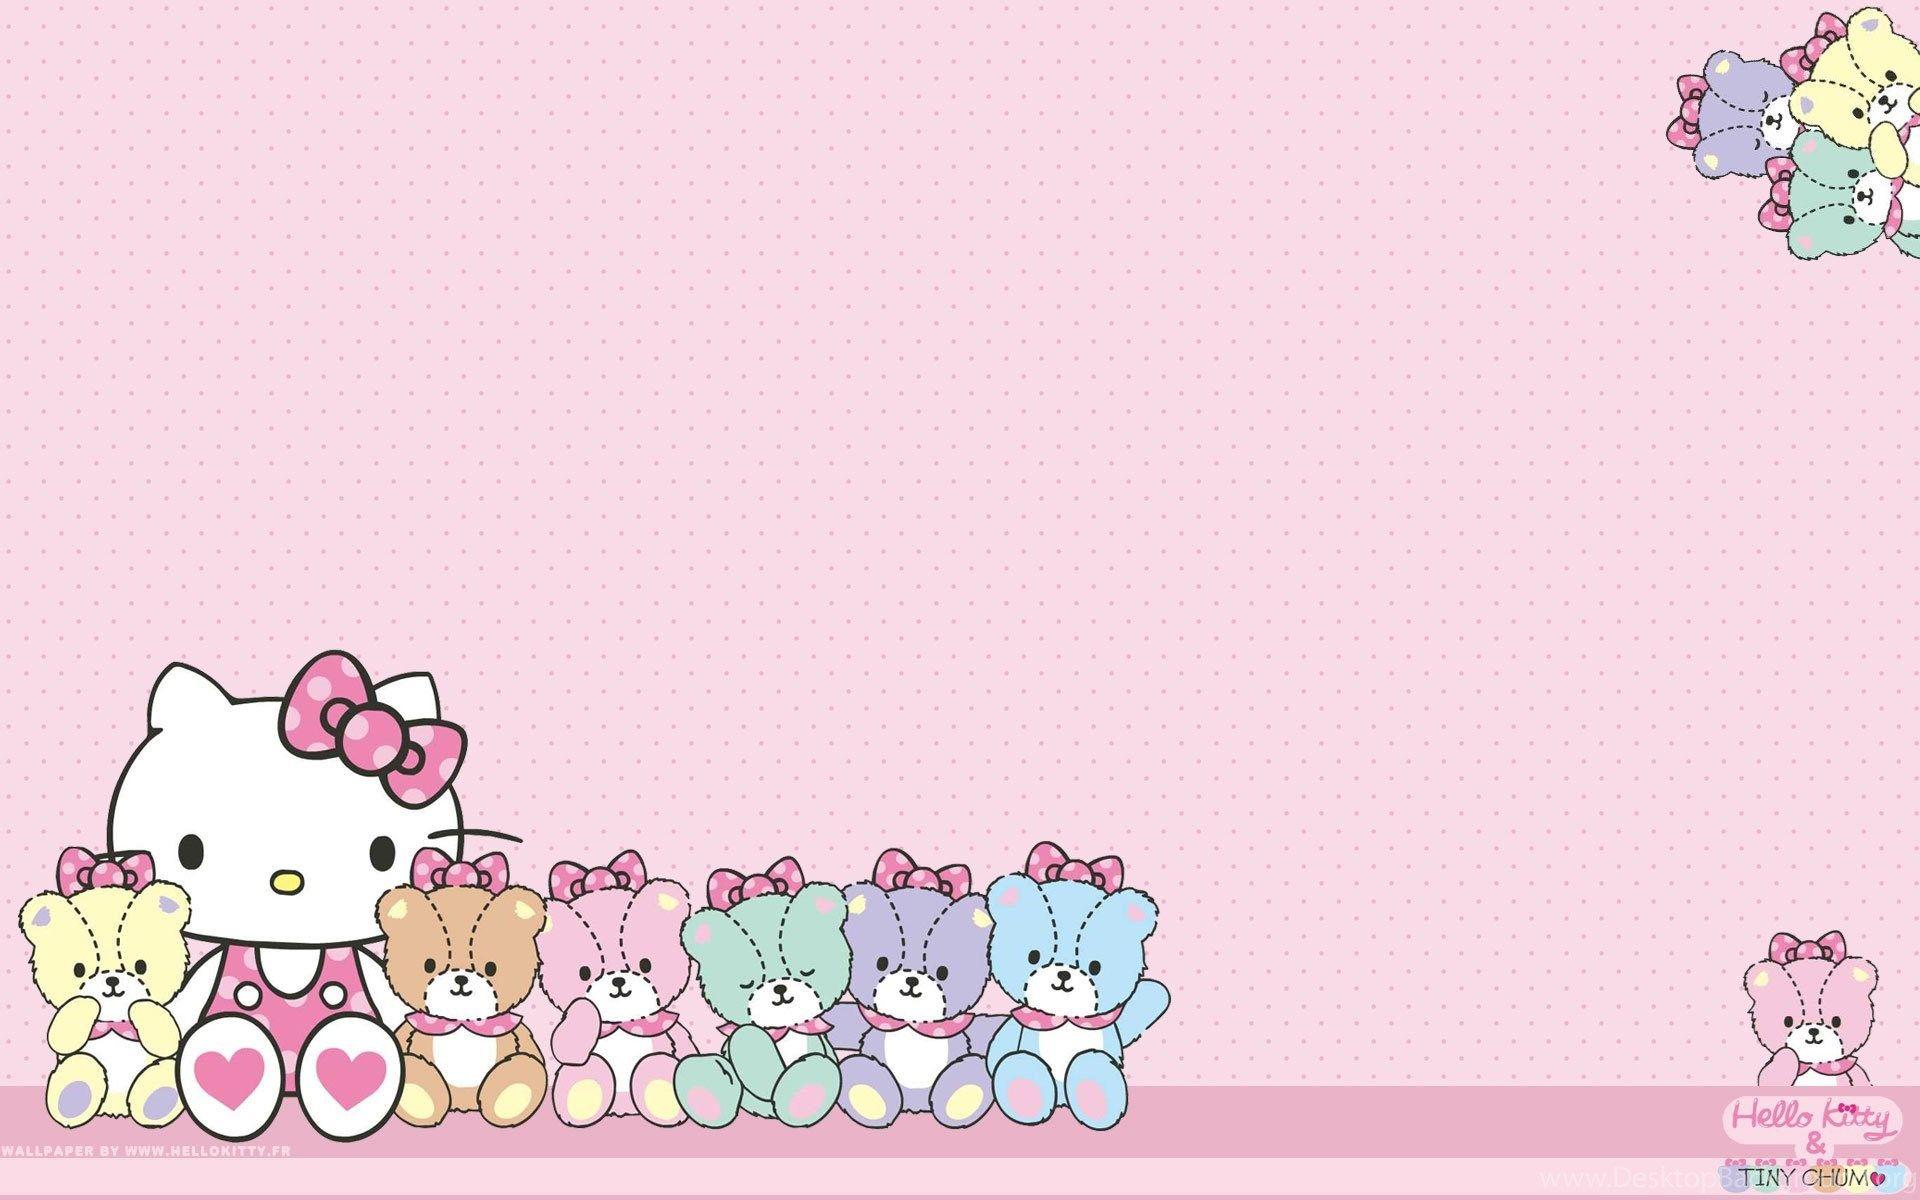 Sanrio Hd Desktop Wallpapers Wallpaper Cave Now she has the icons to go with it and is smiling from ear to ear. sanrio hd desktop wallpapers